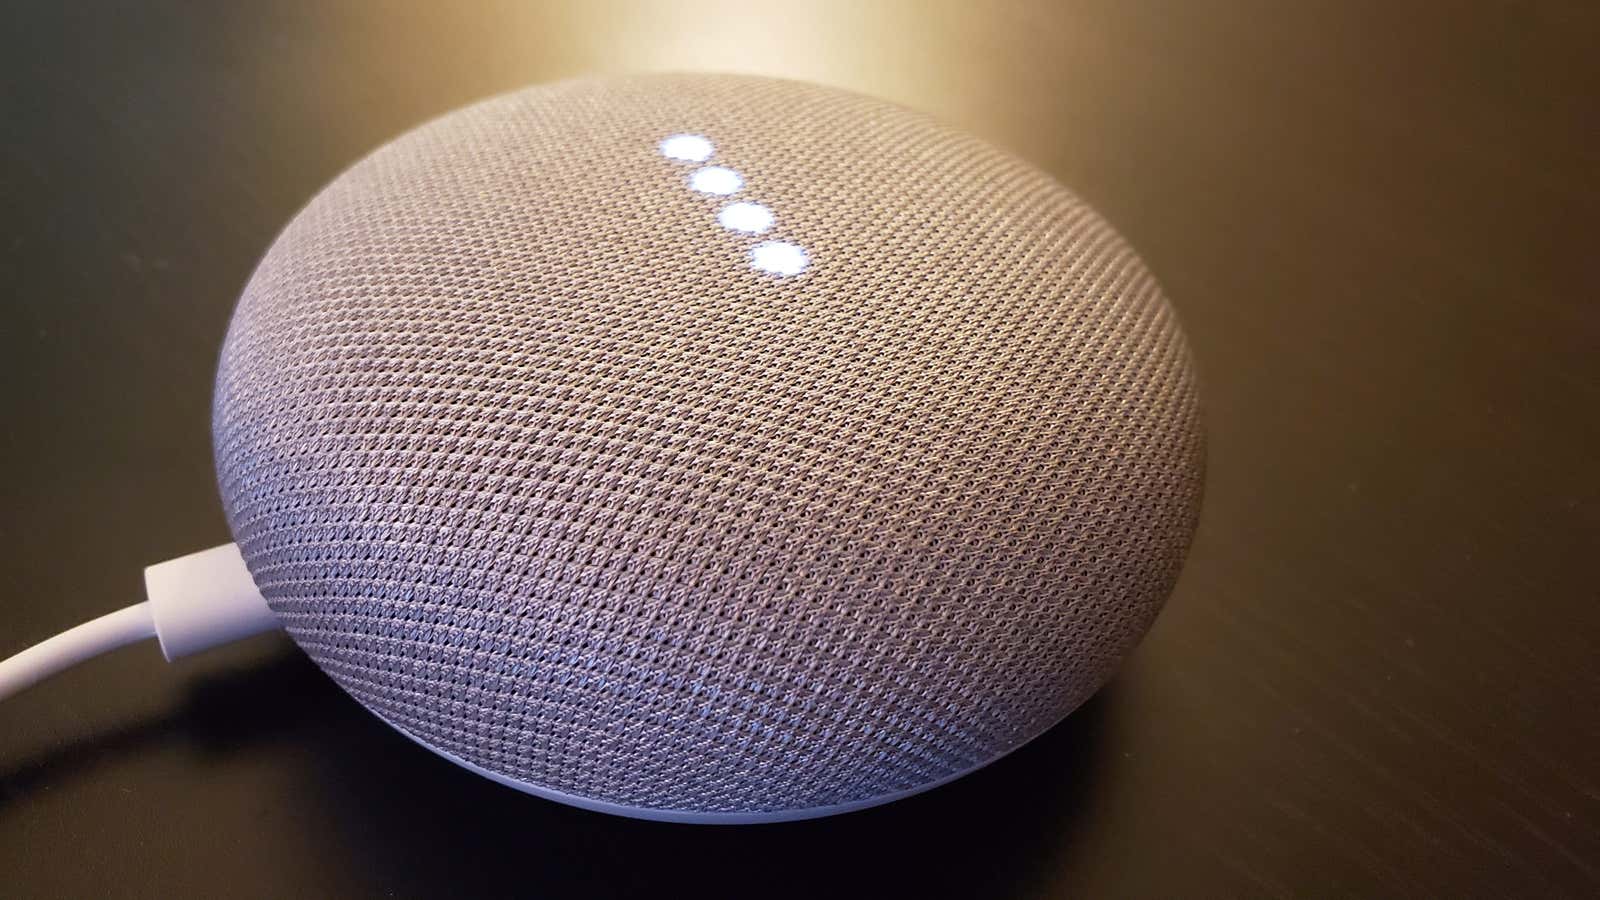 A Google Home smart speaker, which is a rounded gray cylinder with several white lights glowing within.